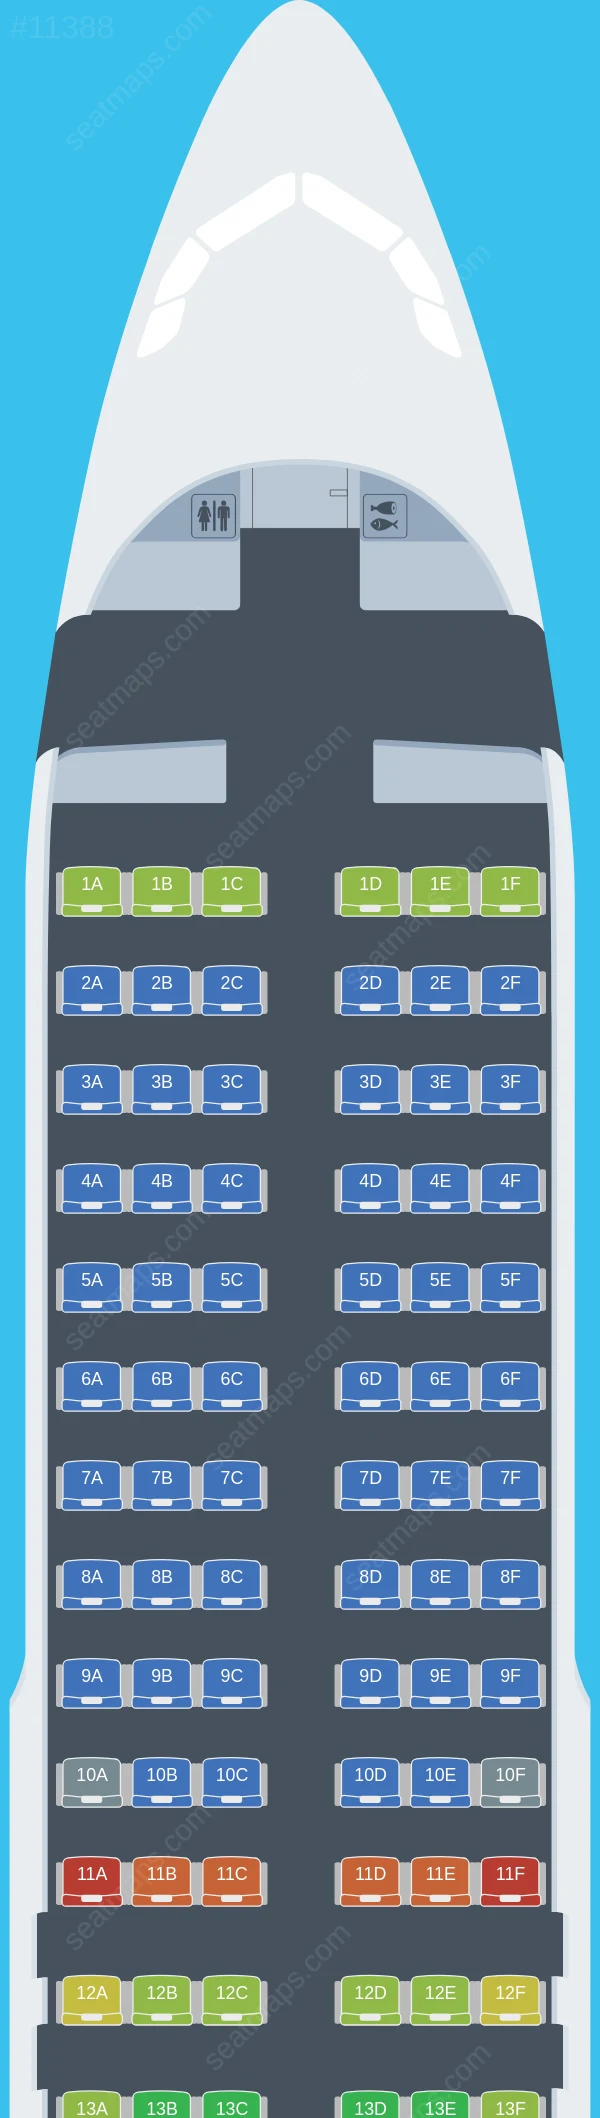 Fly Lili Airbus A320-200 seatmap preview